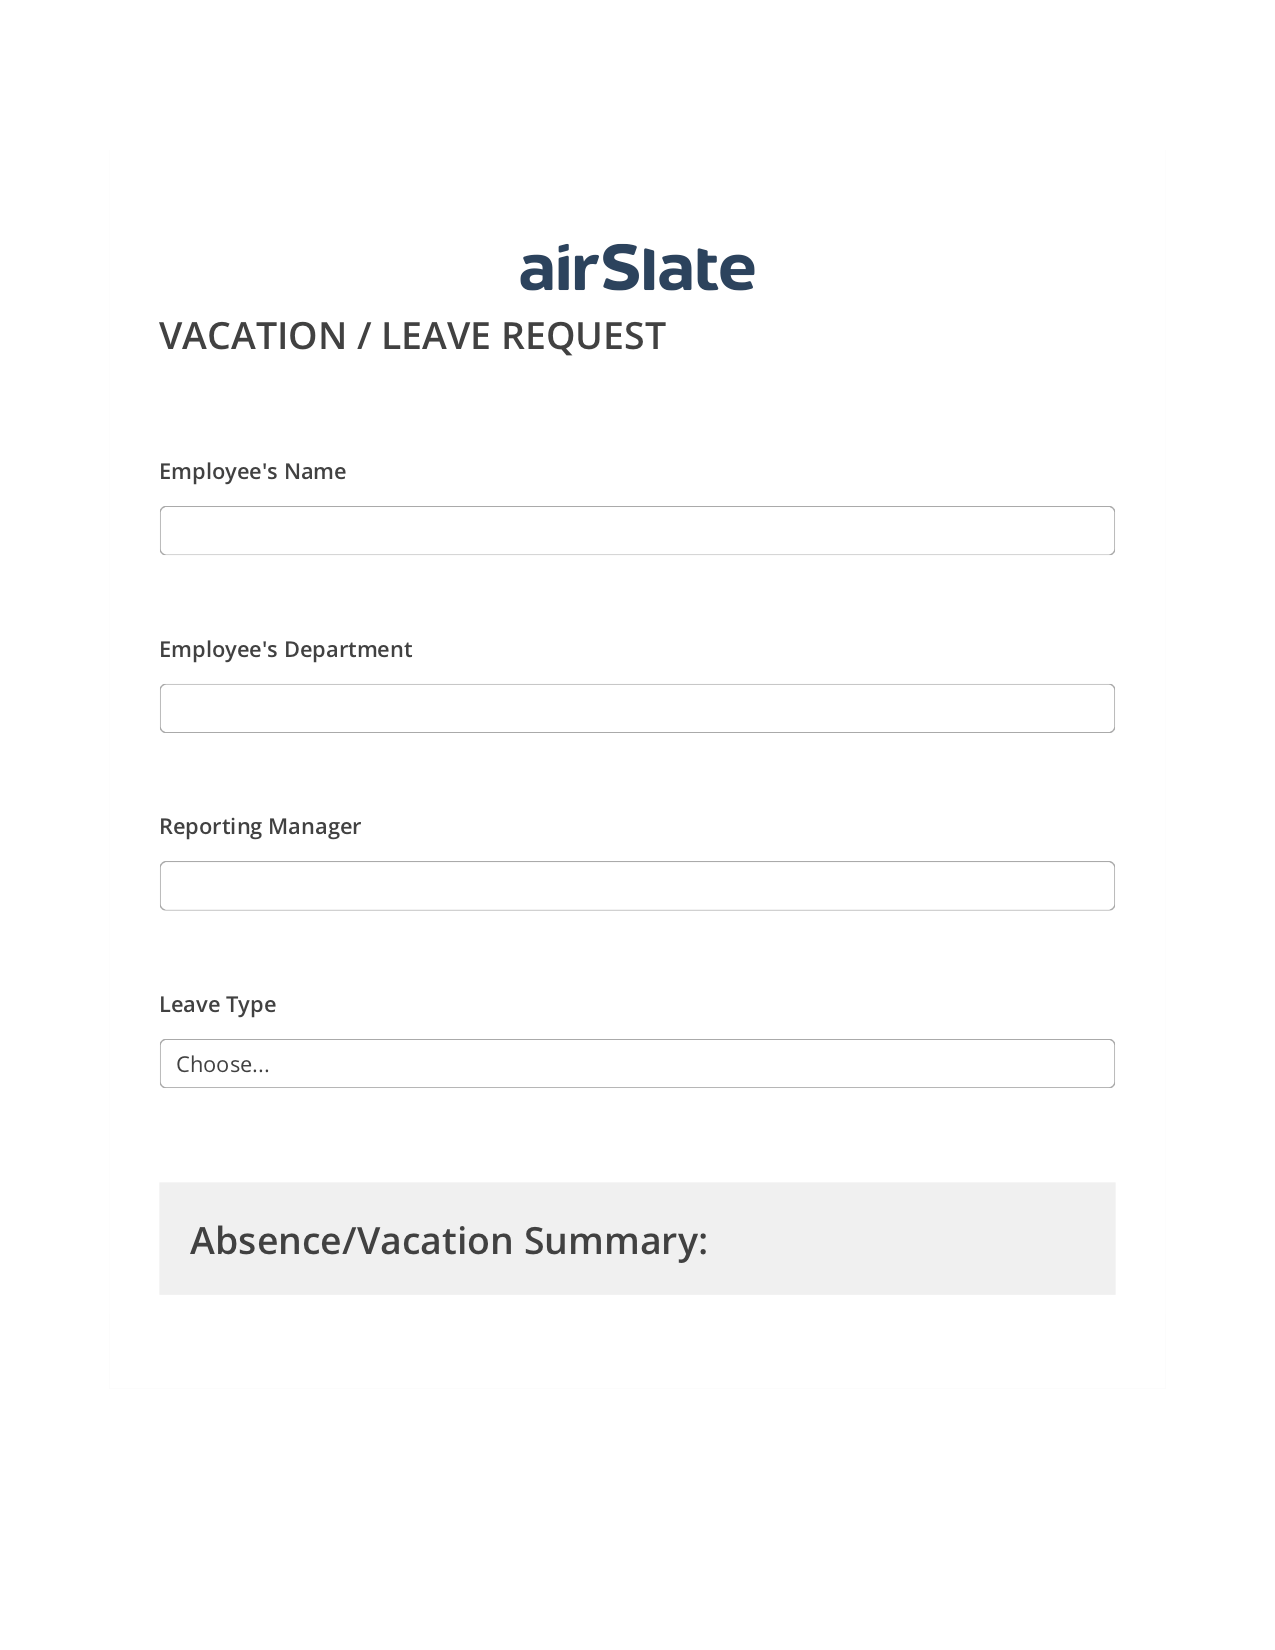 Vacation/Leave Request Workflow Pre-fill Document Bot, Create NetSuite Record bot, Export to Smartsheet